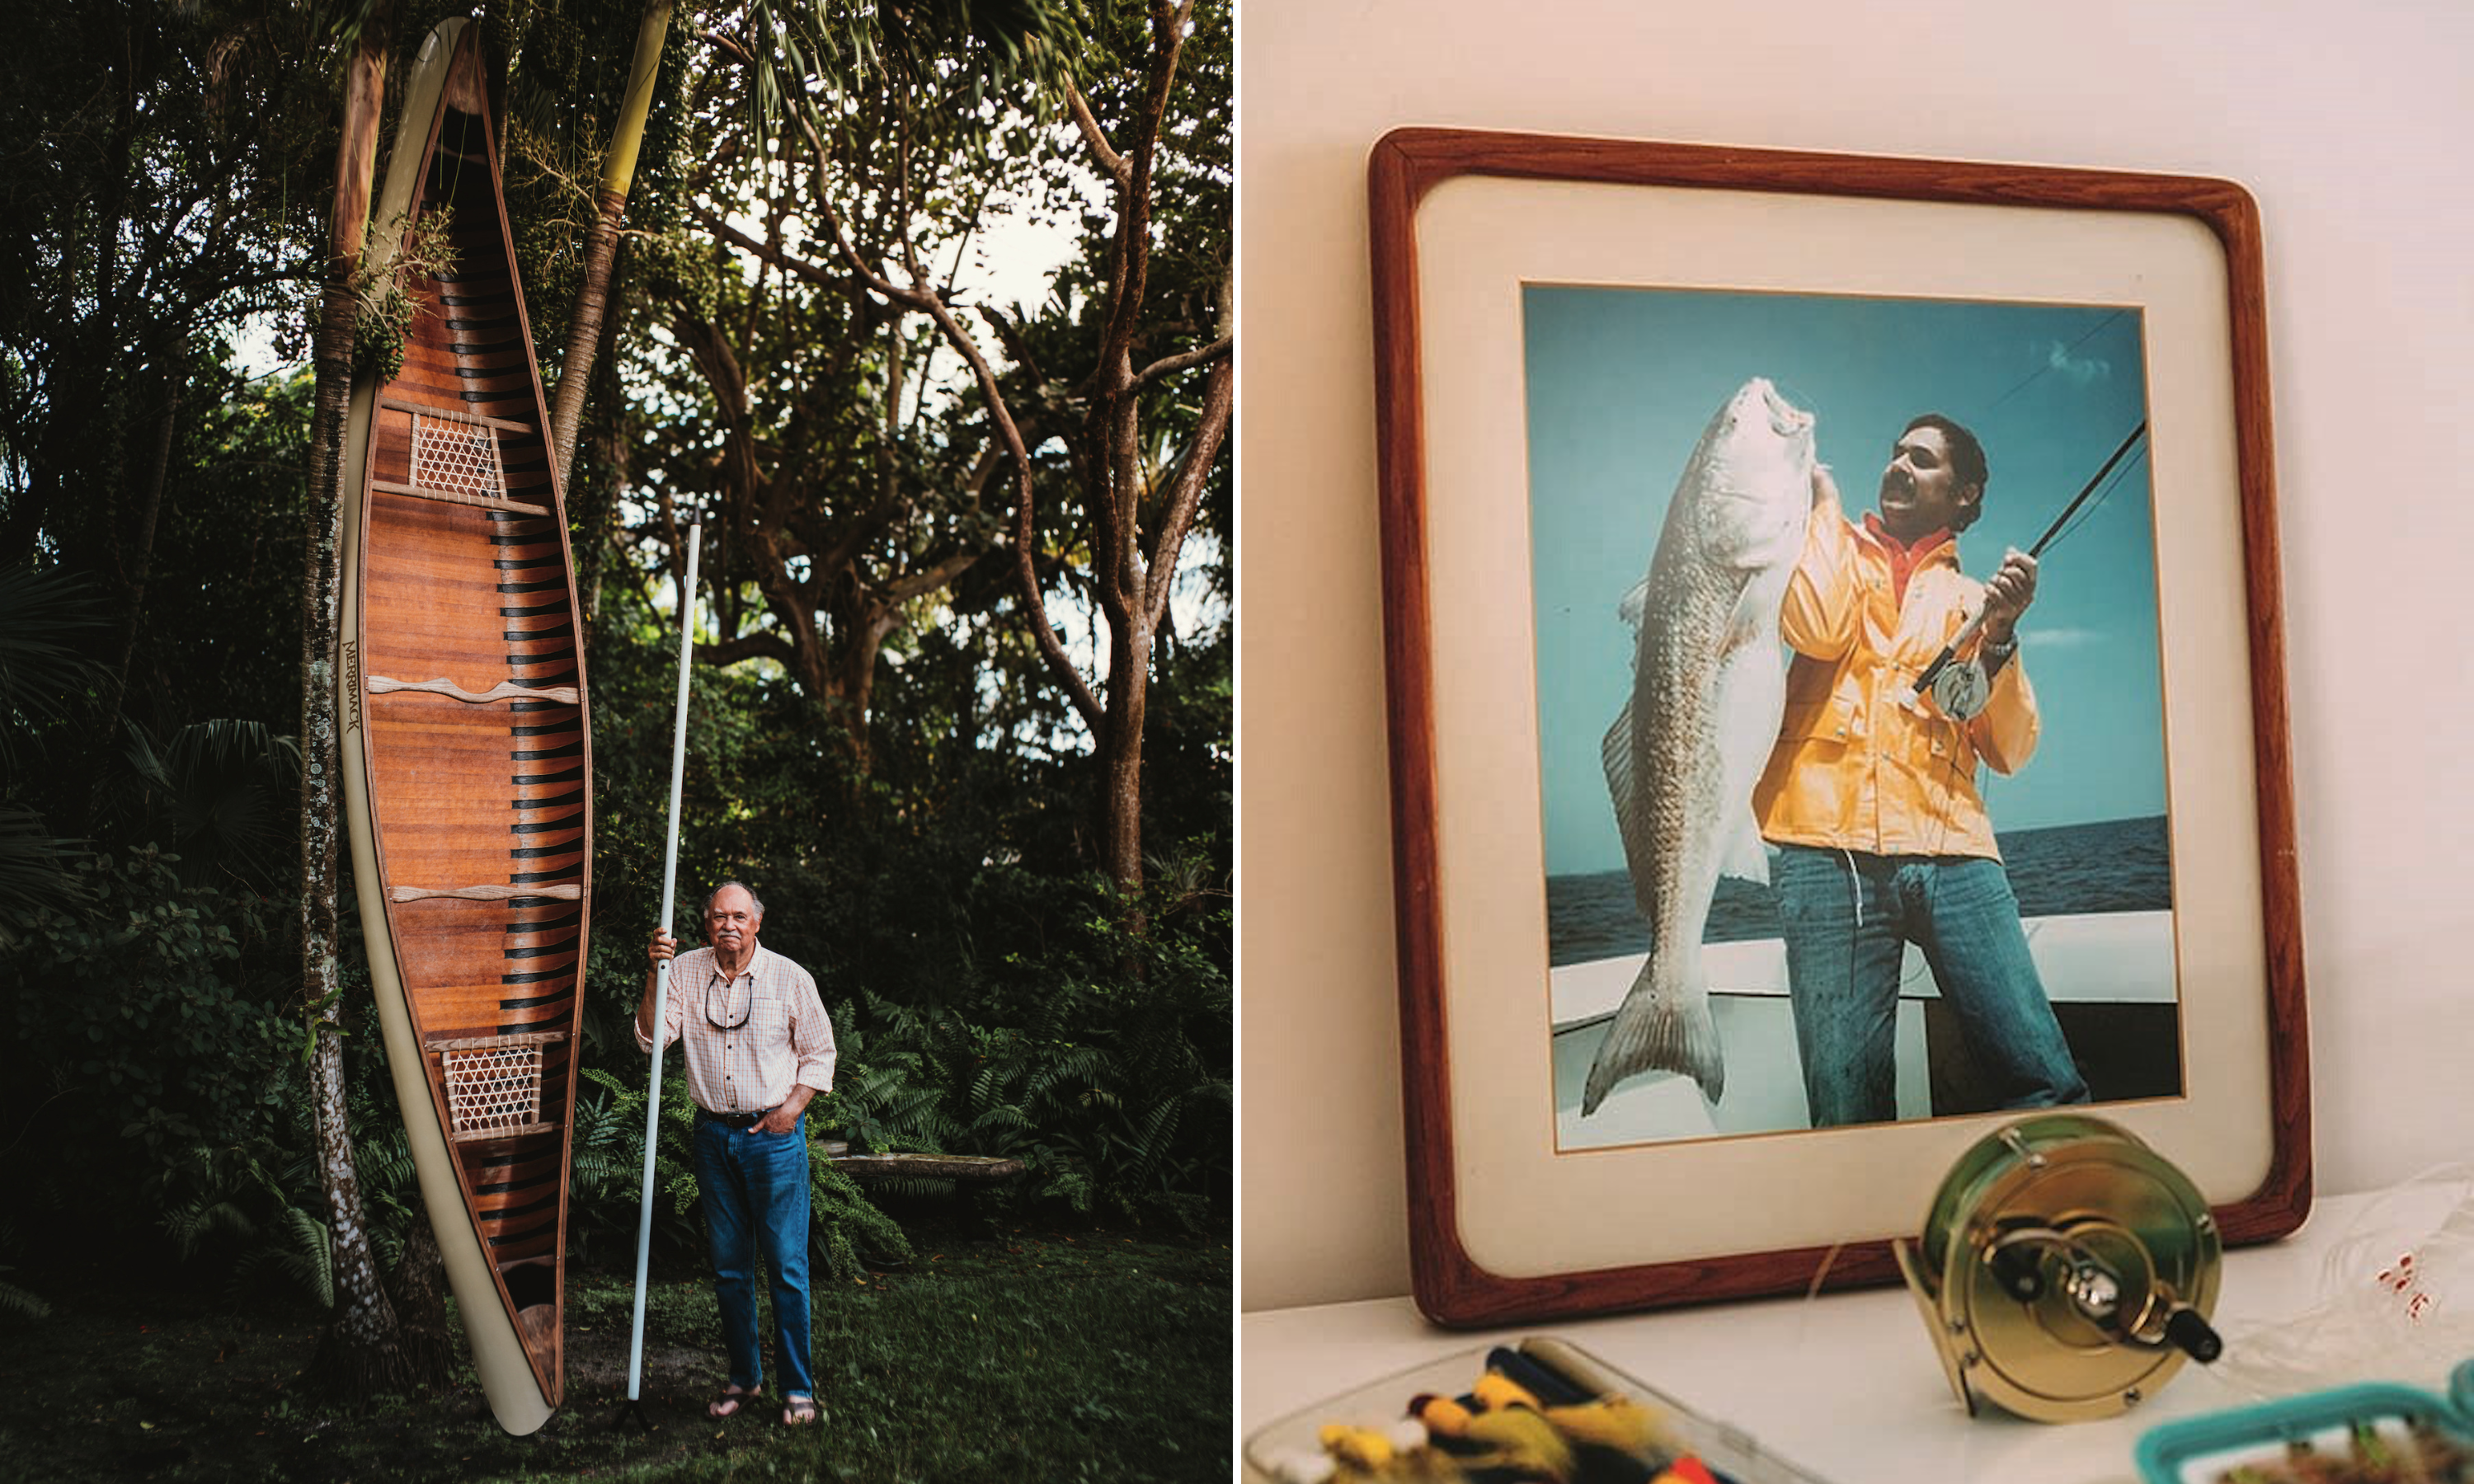 A collage of two images: A man stands outside by a wooden canoe; a framed photo of a man holding a huge redfish on a boat.